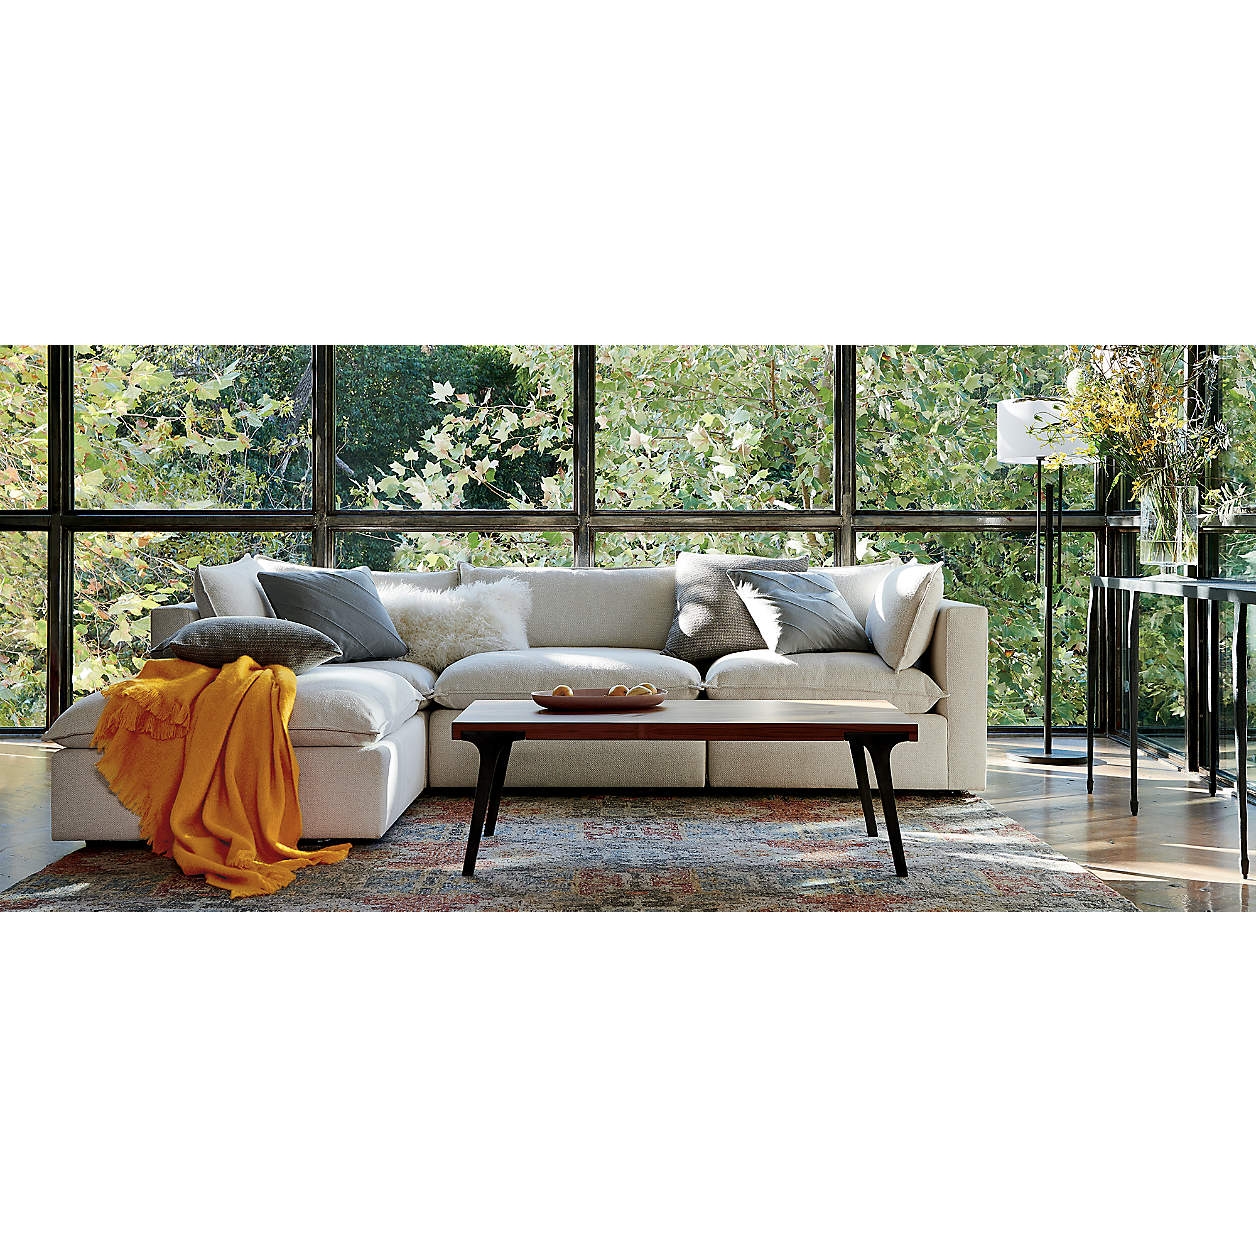 Lotus Deep 4-Piece Reversible Sectional with Ottoman - Image 2